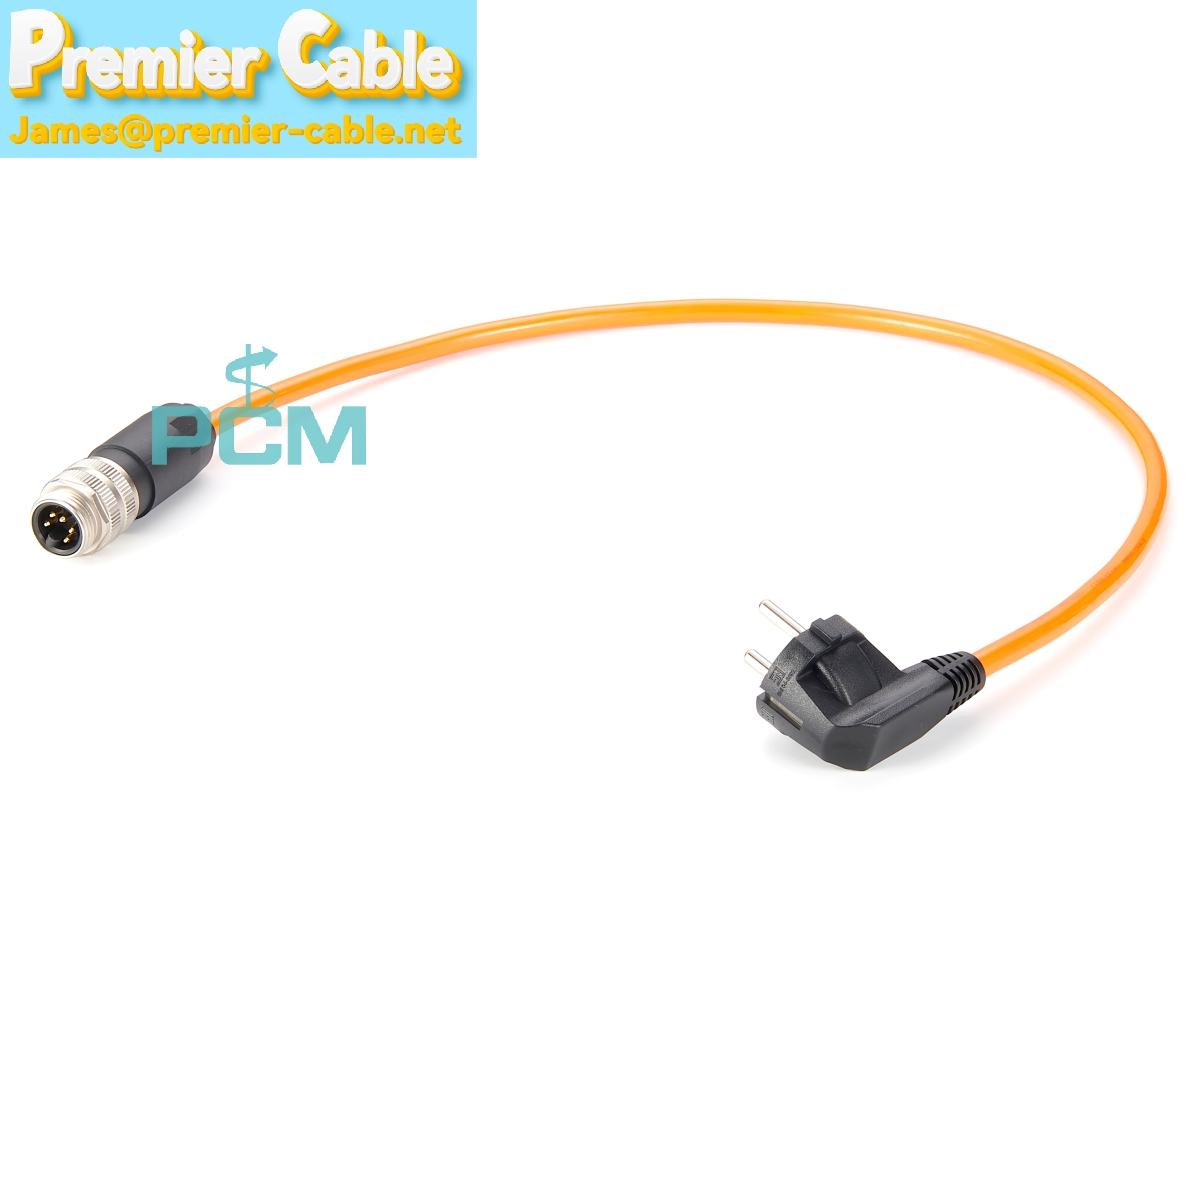 7/8" Connector to Europe plug Power Connection Cable